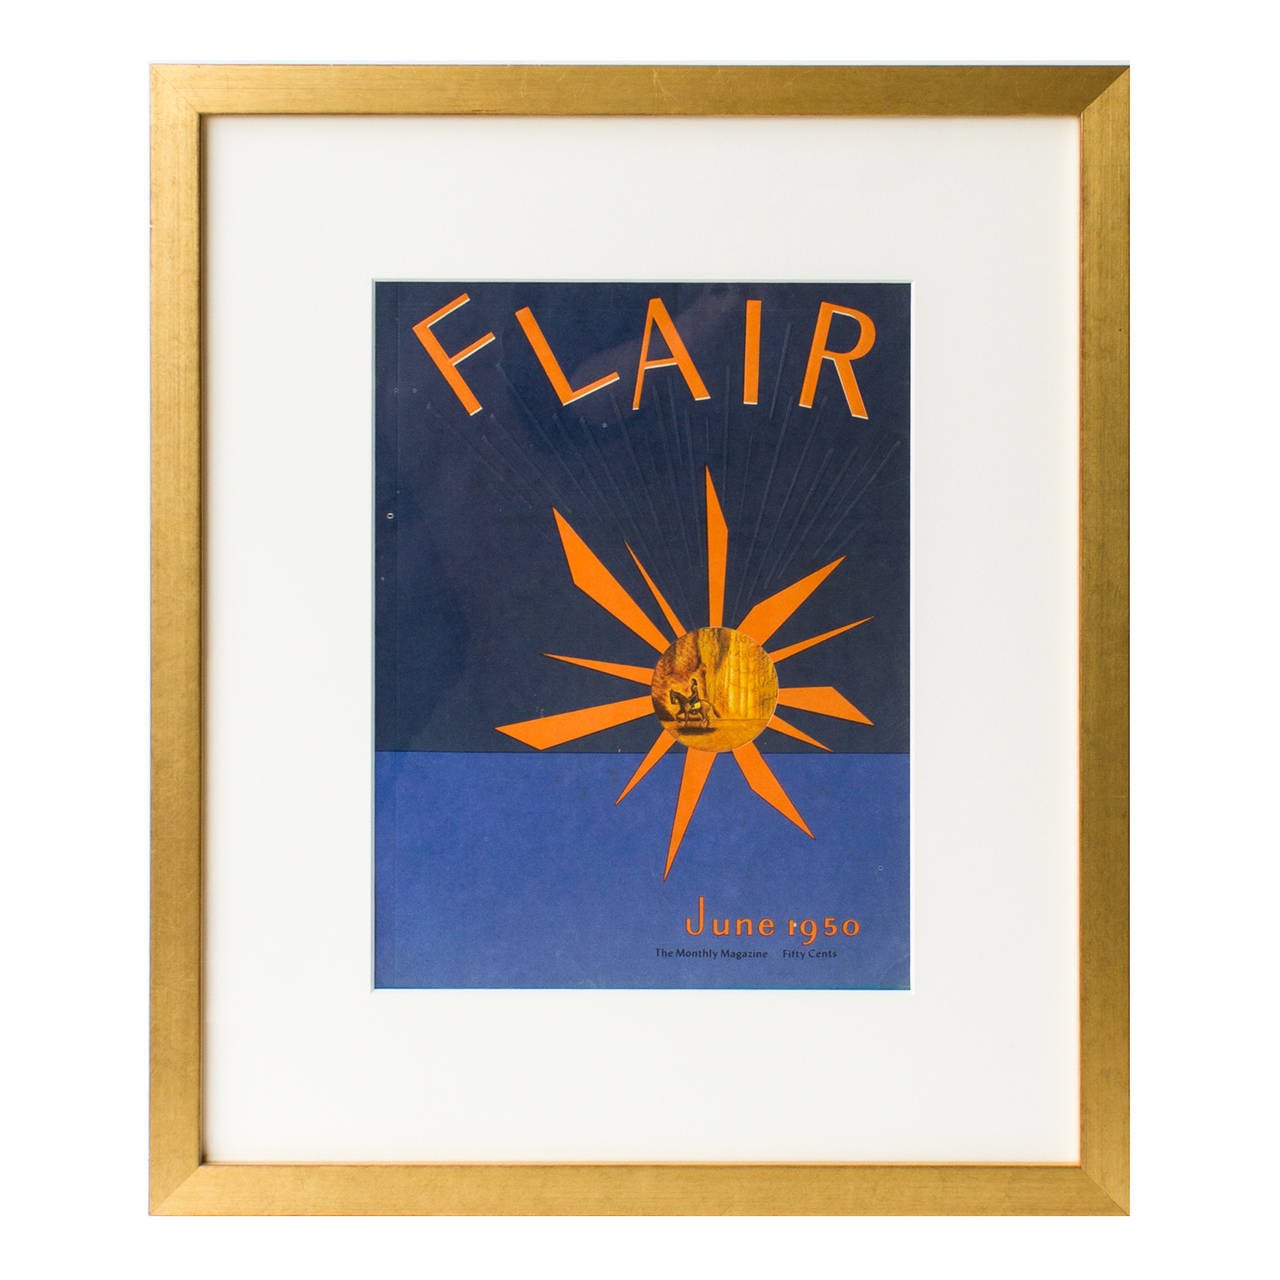 This is the complete series of Fleur Cowles's iconic Fashion and Art Periodical, Flair. Each full issue is matted and framed under uv-protected museum glass. These 12 full editions from 1950-1951 are rare, as Flair Magazine collapsed after only one